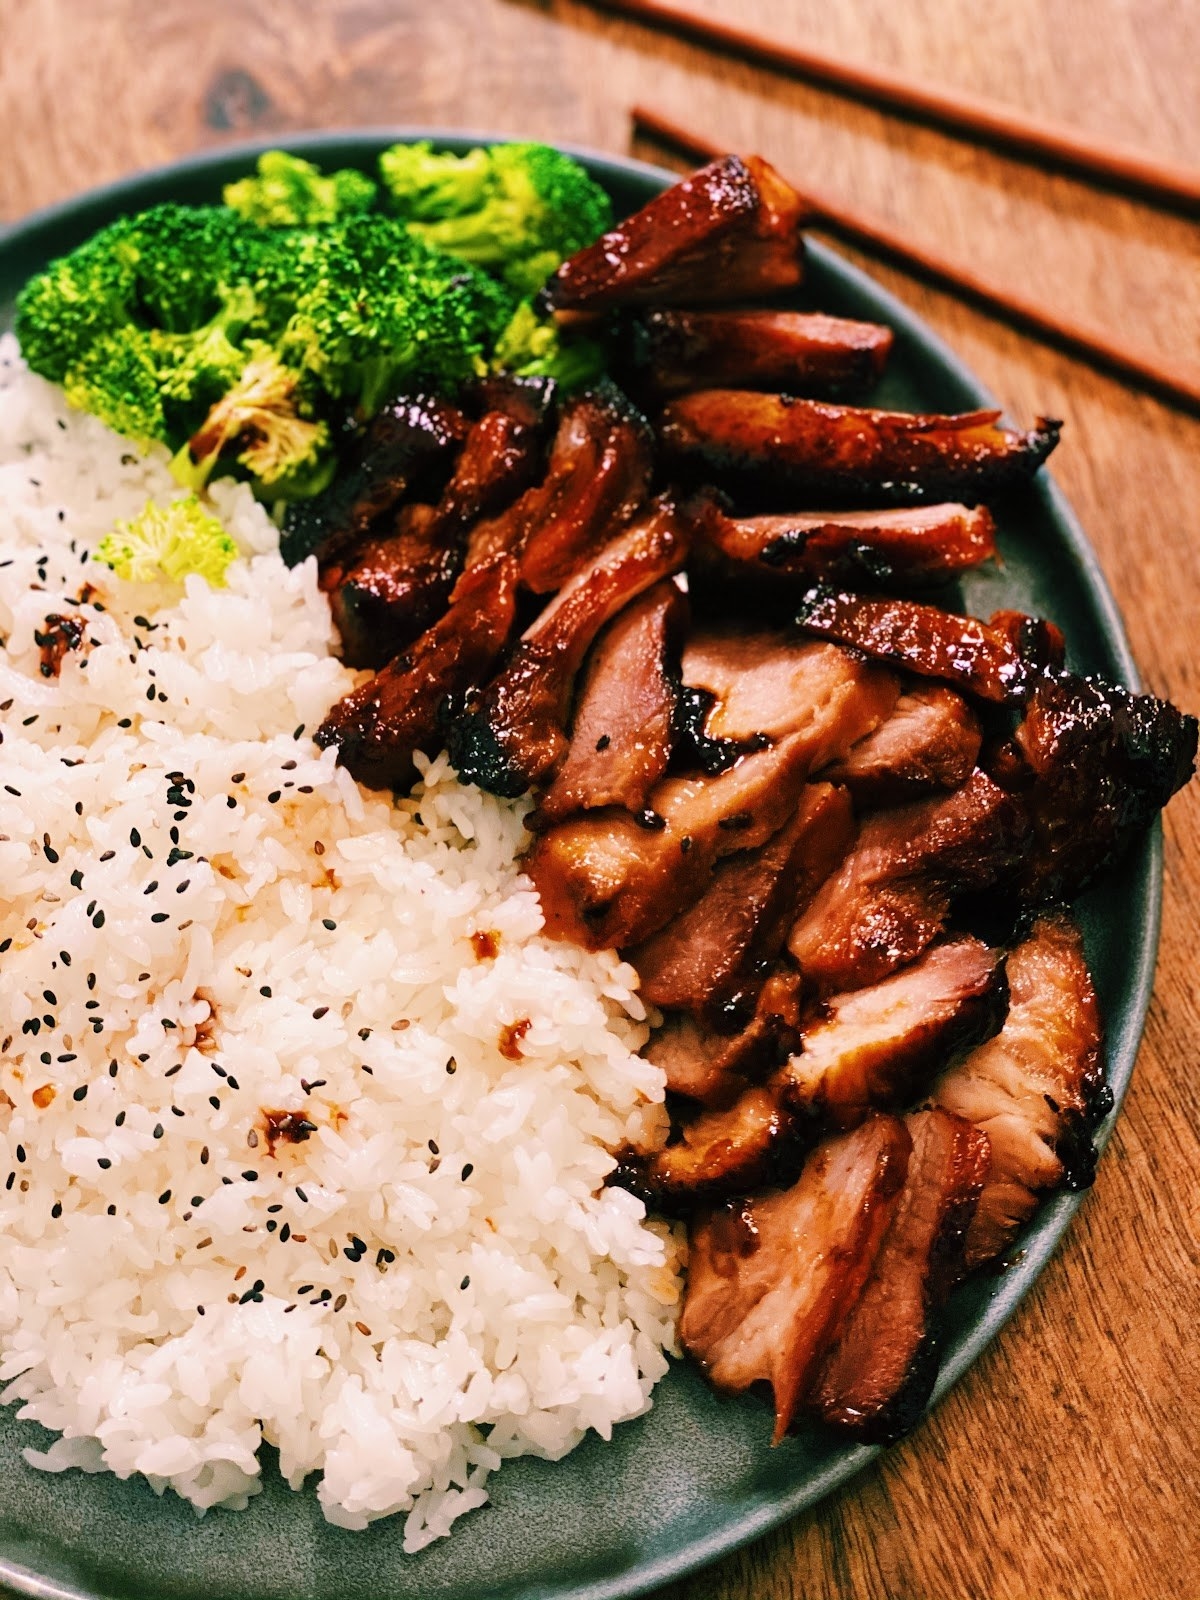 Sliced Chinese BBQ pork with rice.